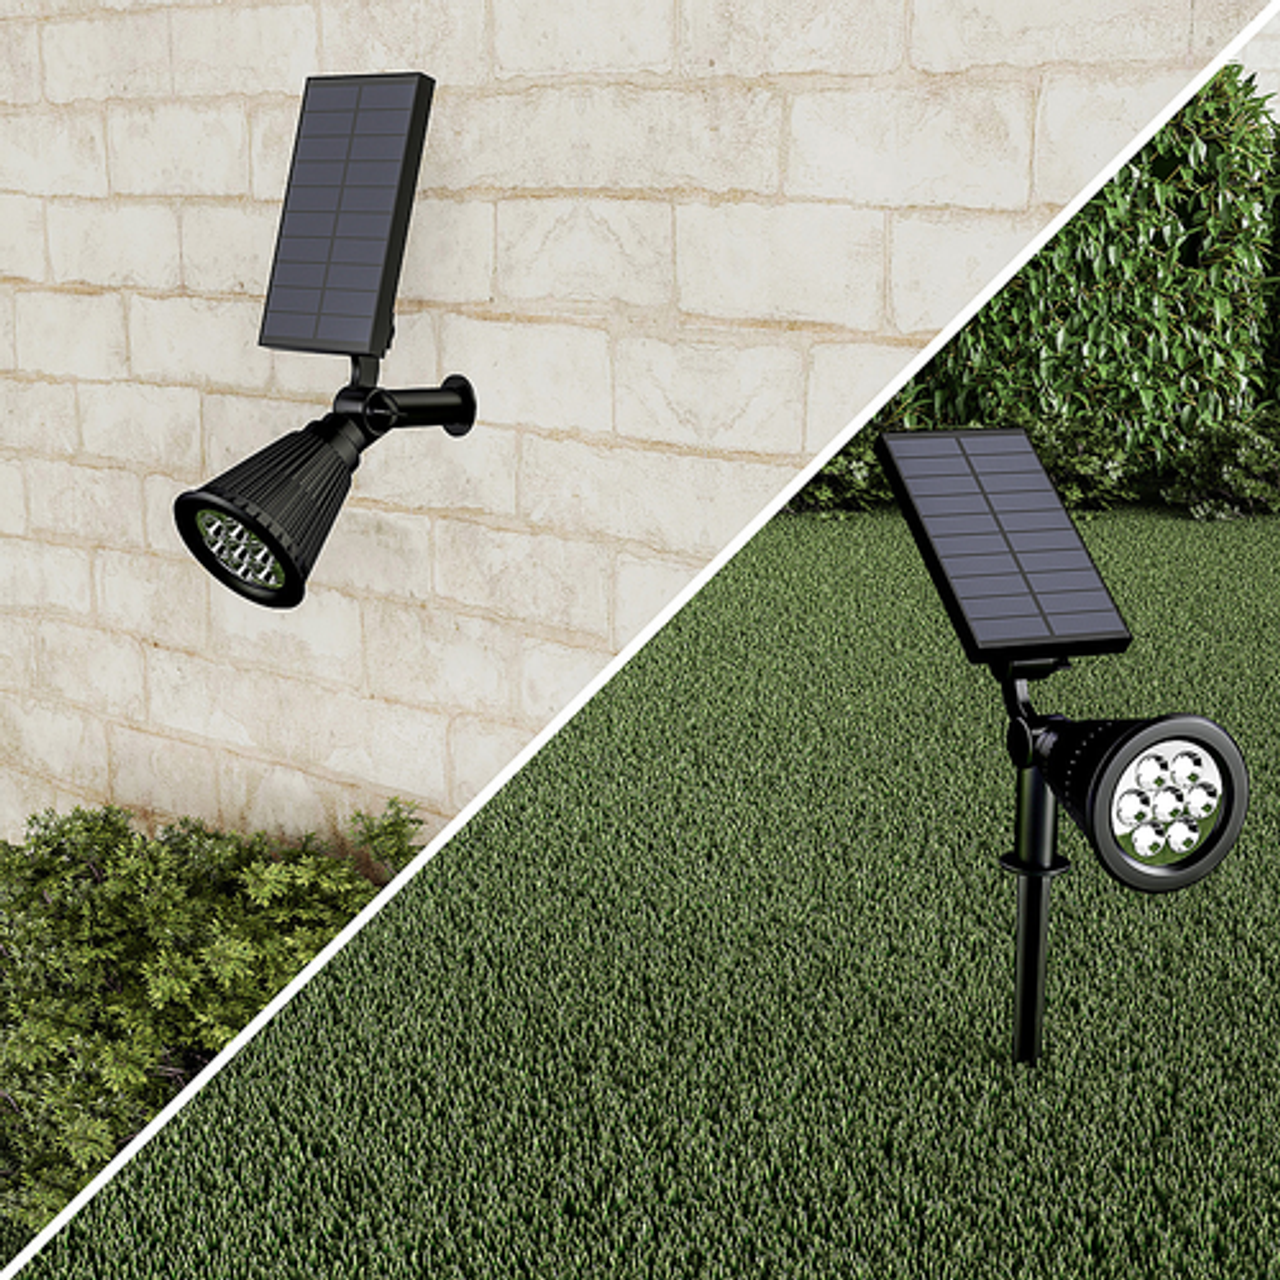 Nature Spring - Outdoor LED Solar Lights - 2 Pack - 7 Bulb Spotlights - Landscape or Wall Mount for Pools, Flags, Paths & Driveway - Black